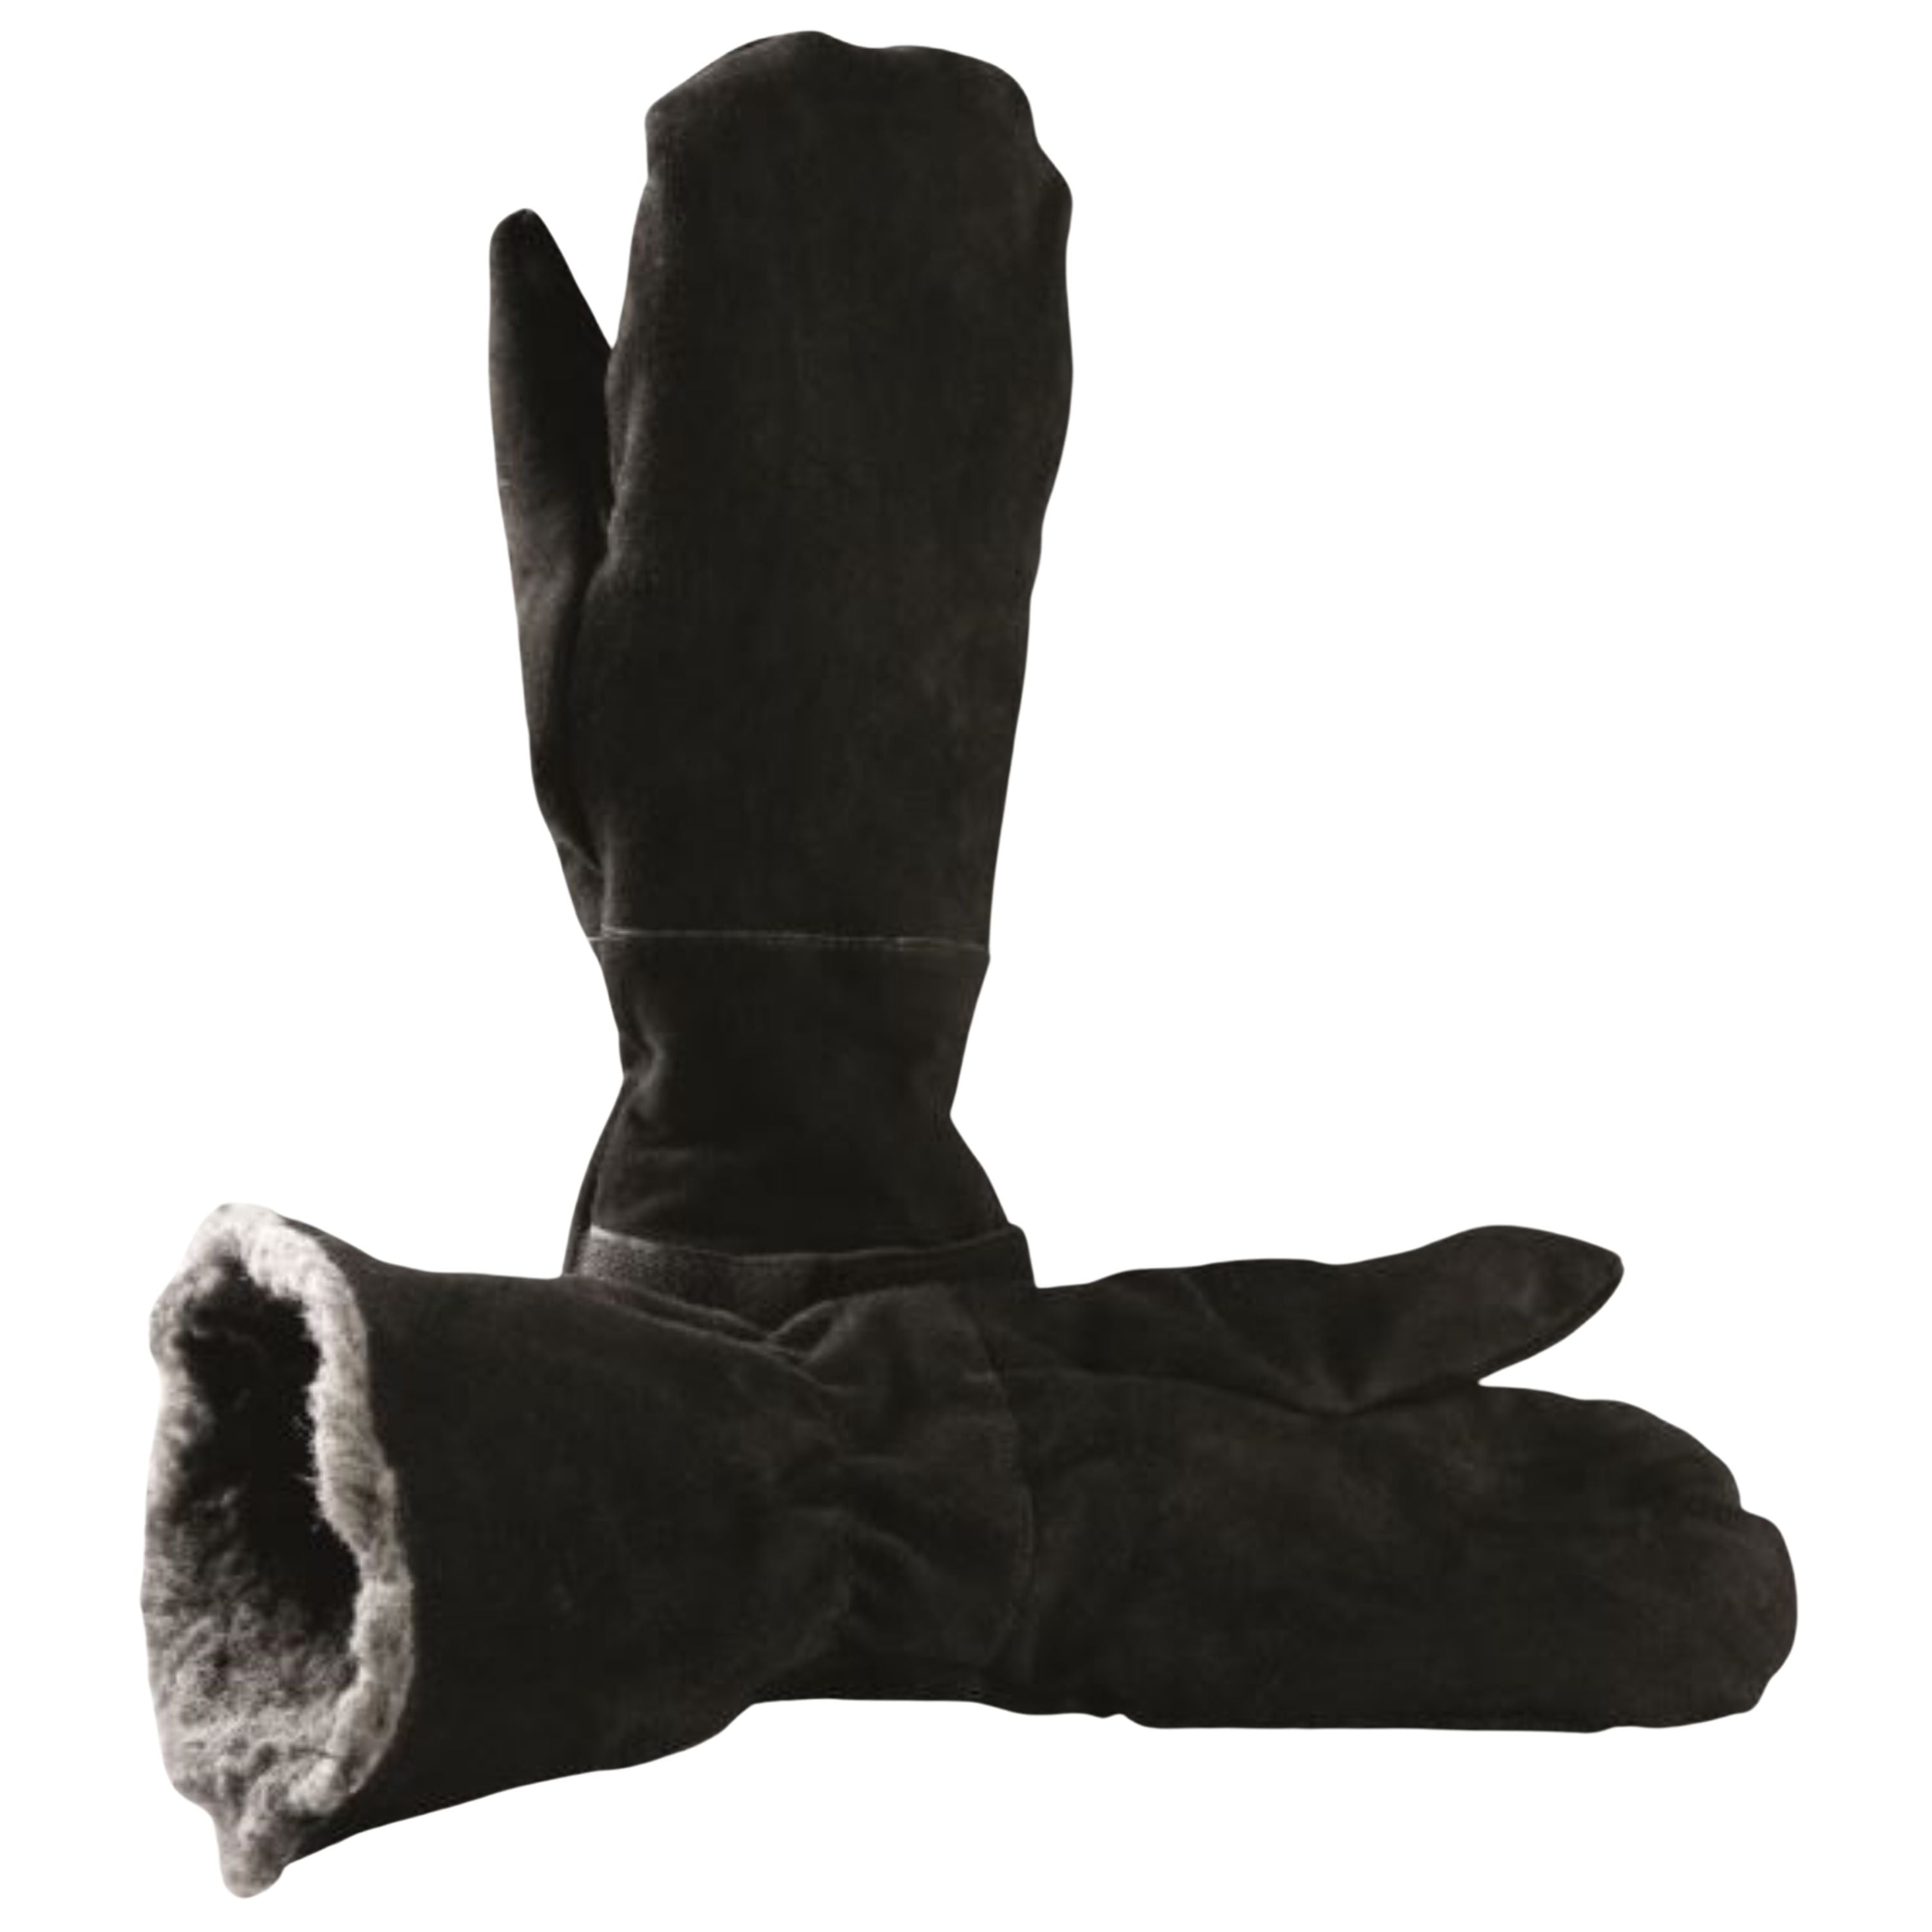 Cow leather mittens - Men’s